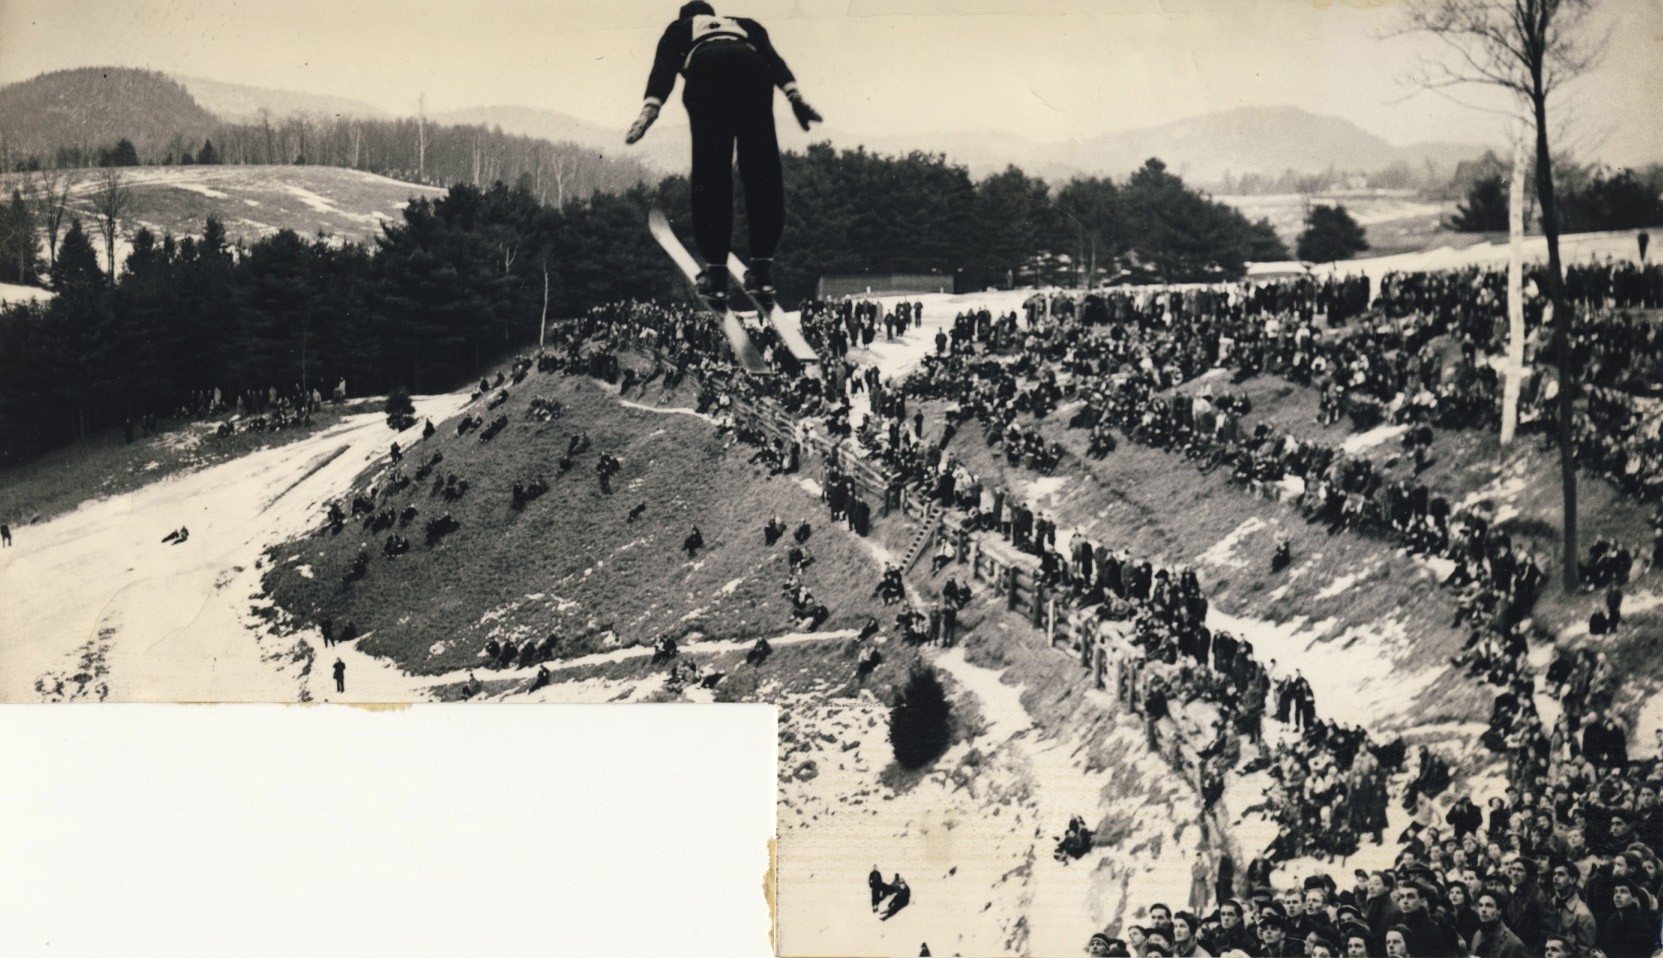 Warren Chivers at the 1938 Winter Carnival